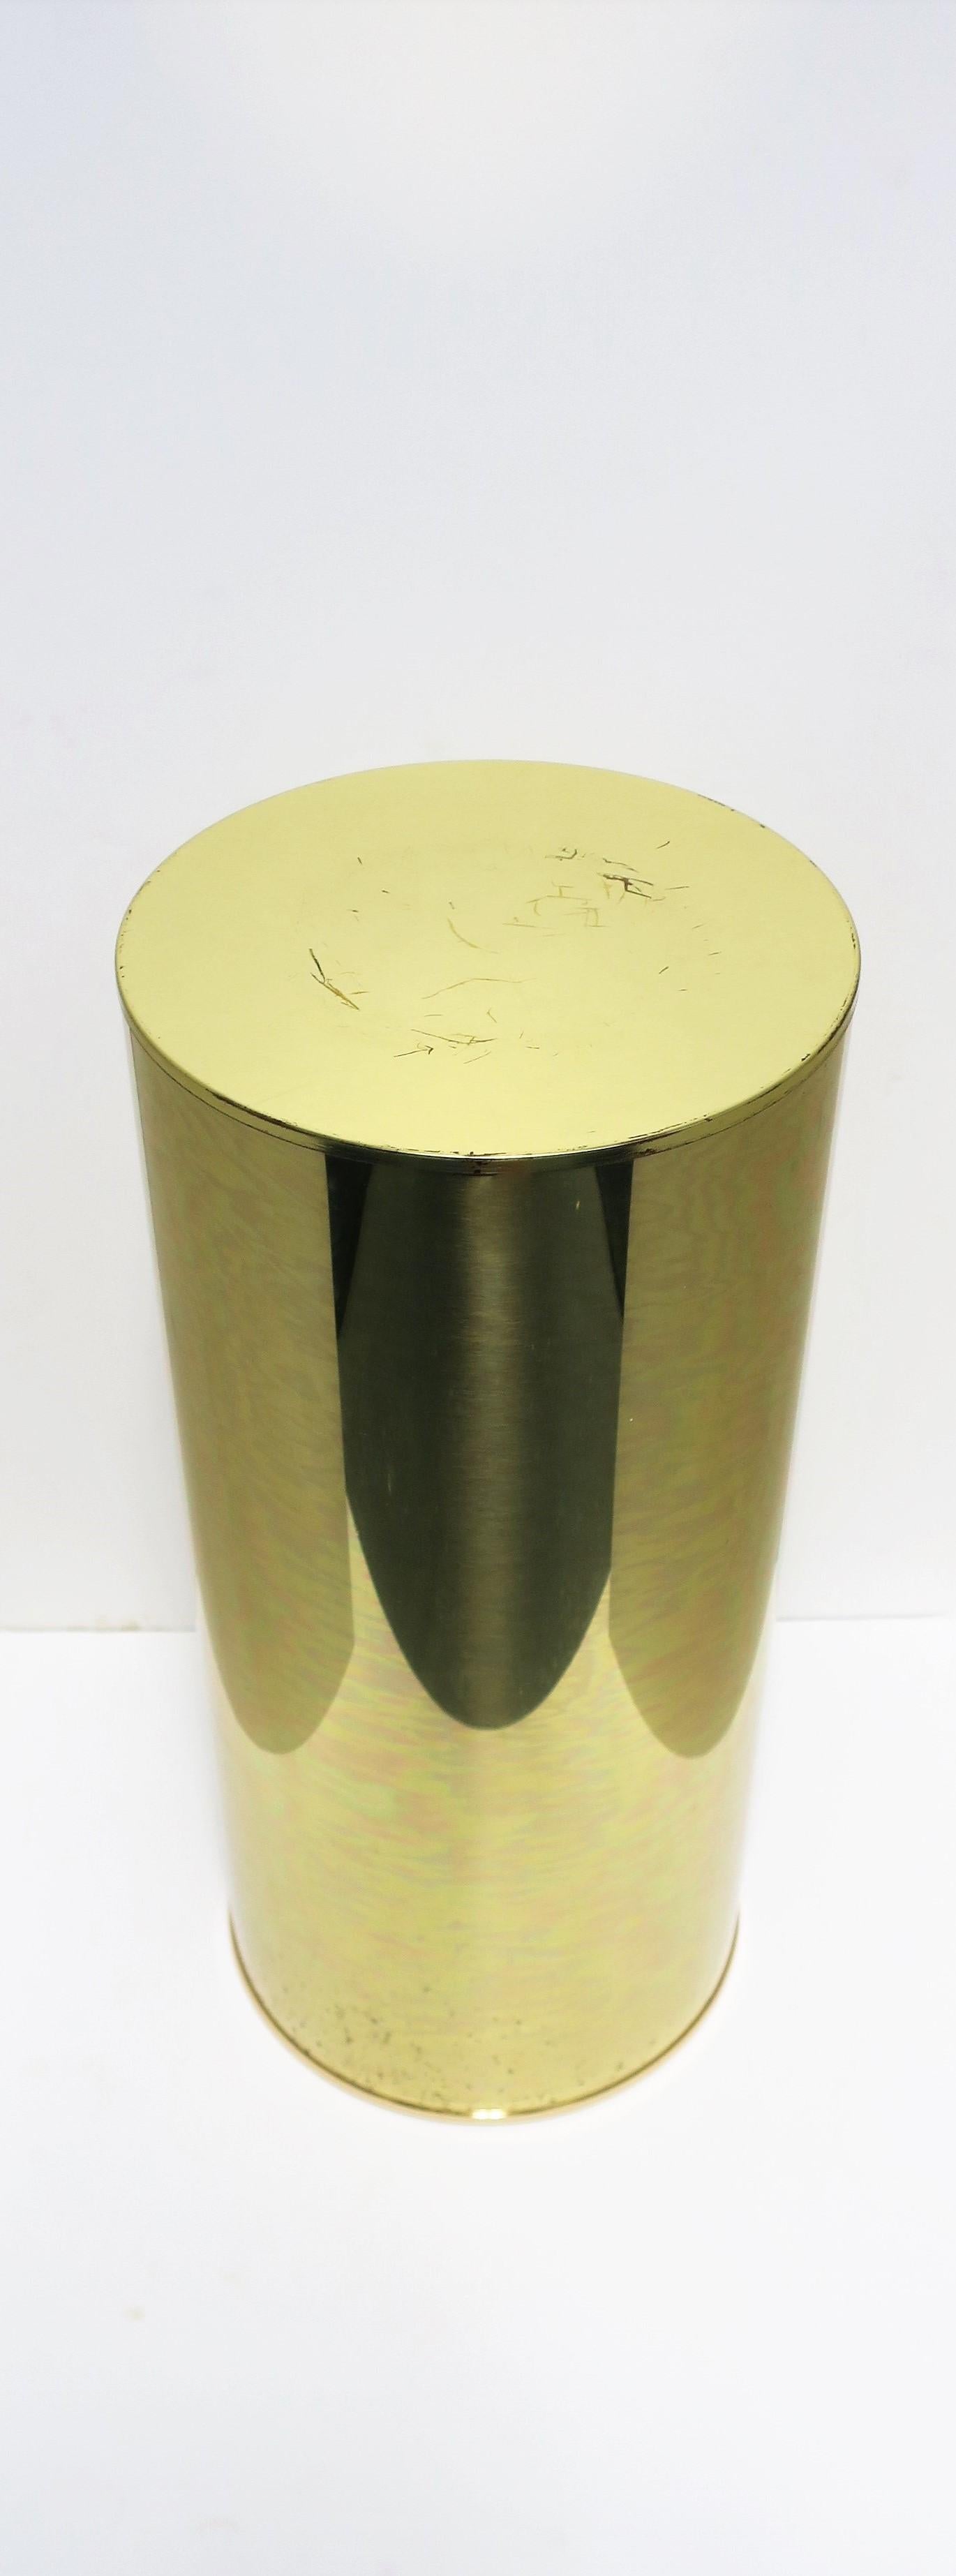 Late 20th Century Modern Brass Pedestal Column Pillar Stand Signed by Designers C. Jere For Sale